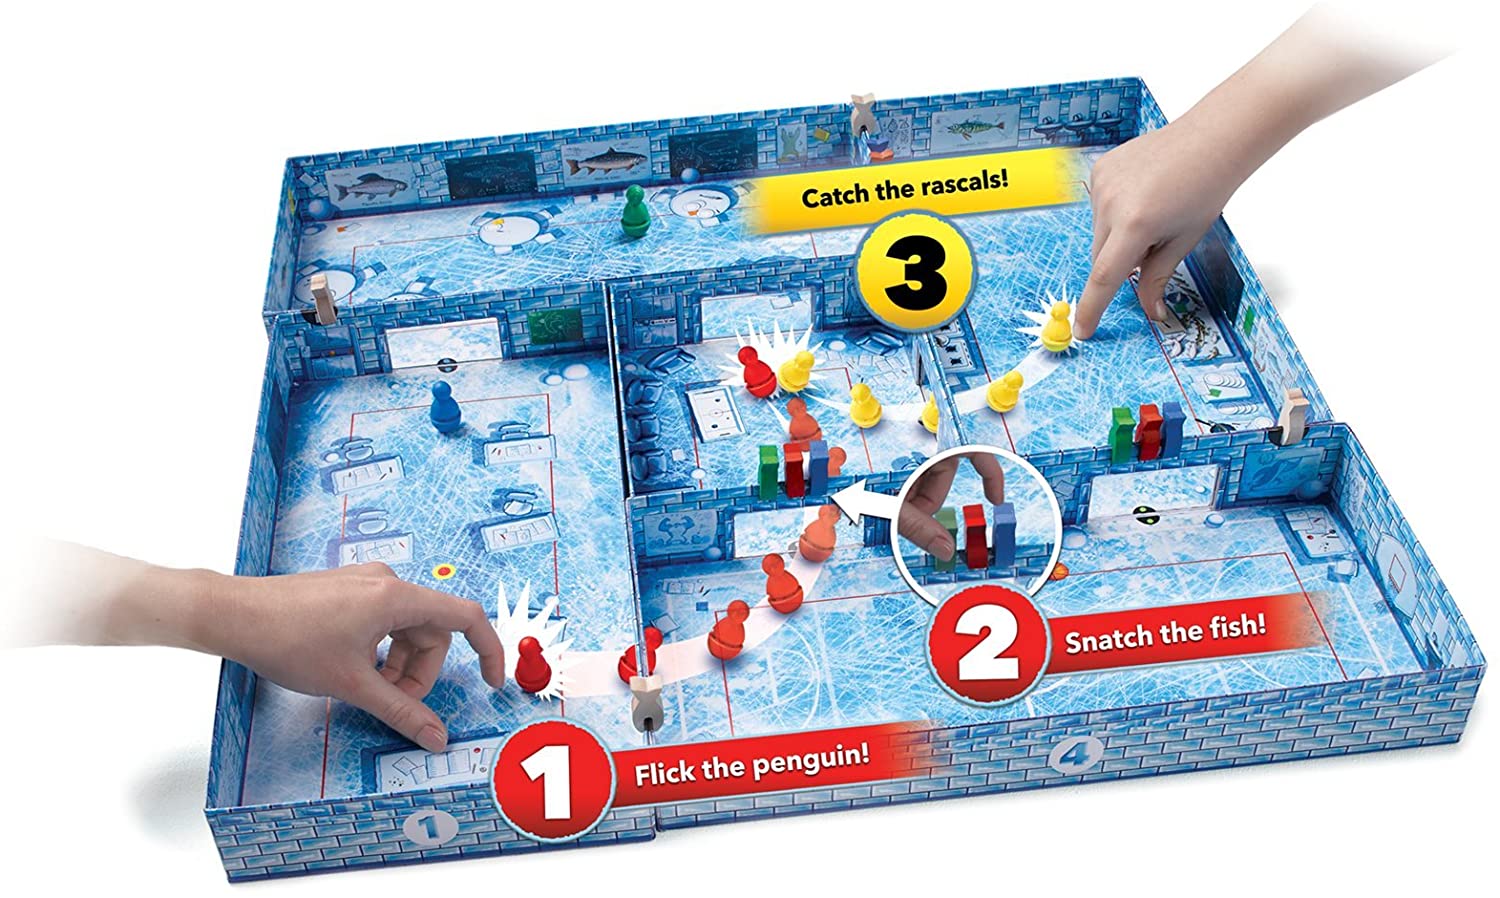 ICECOOL Game Image 3